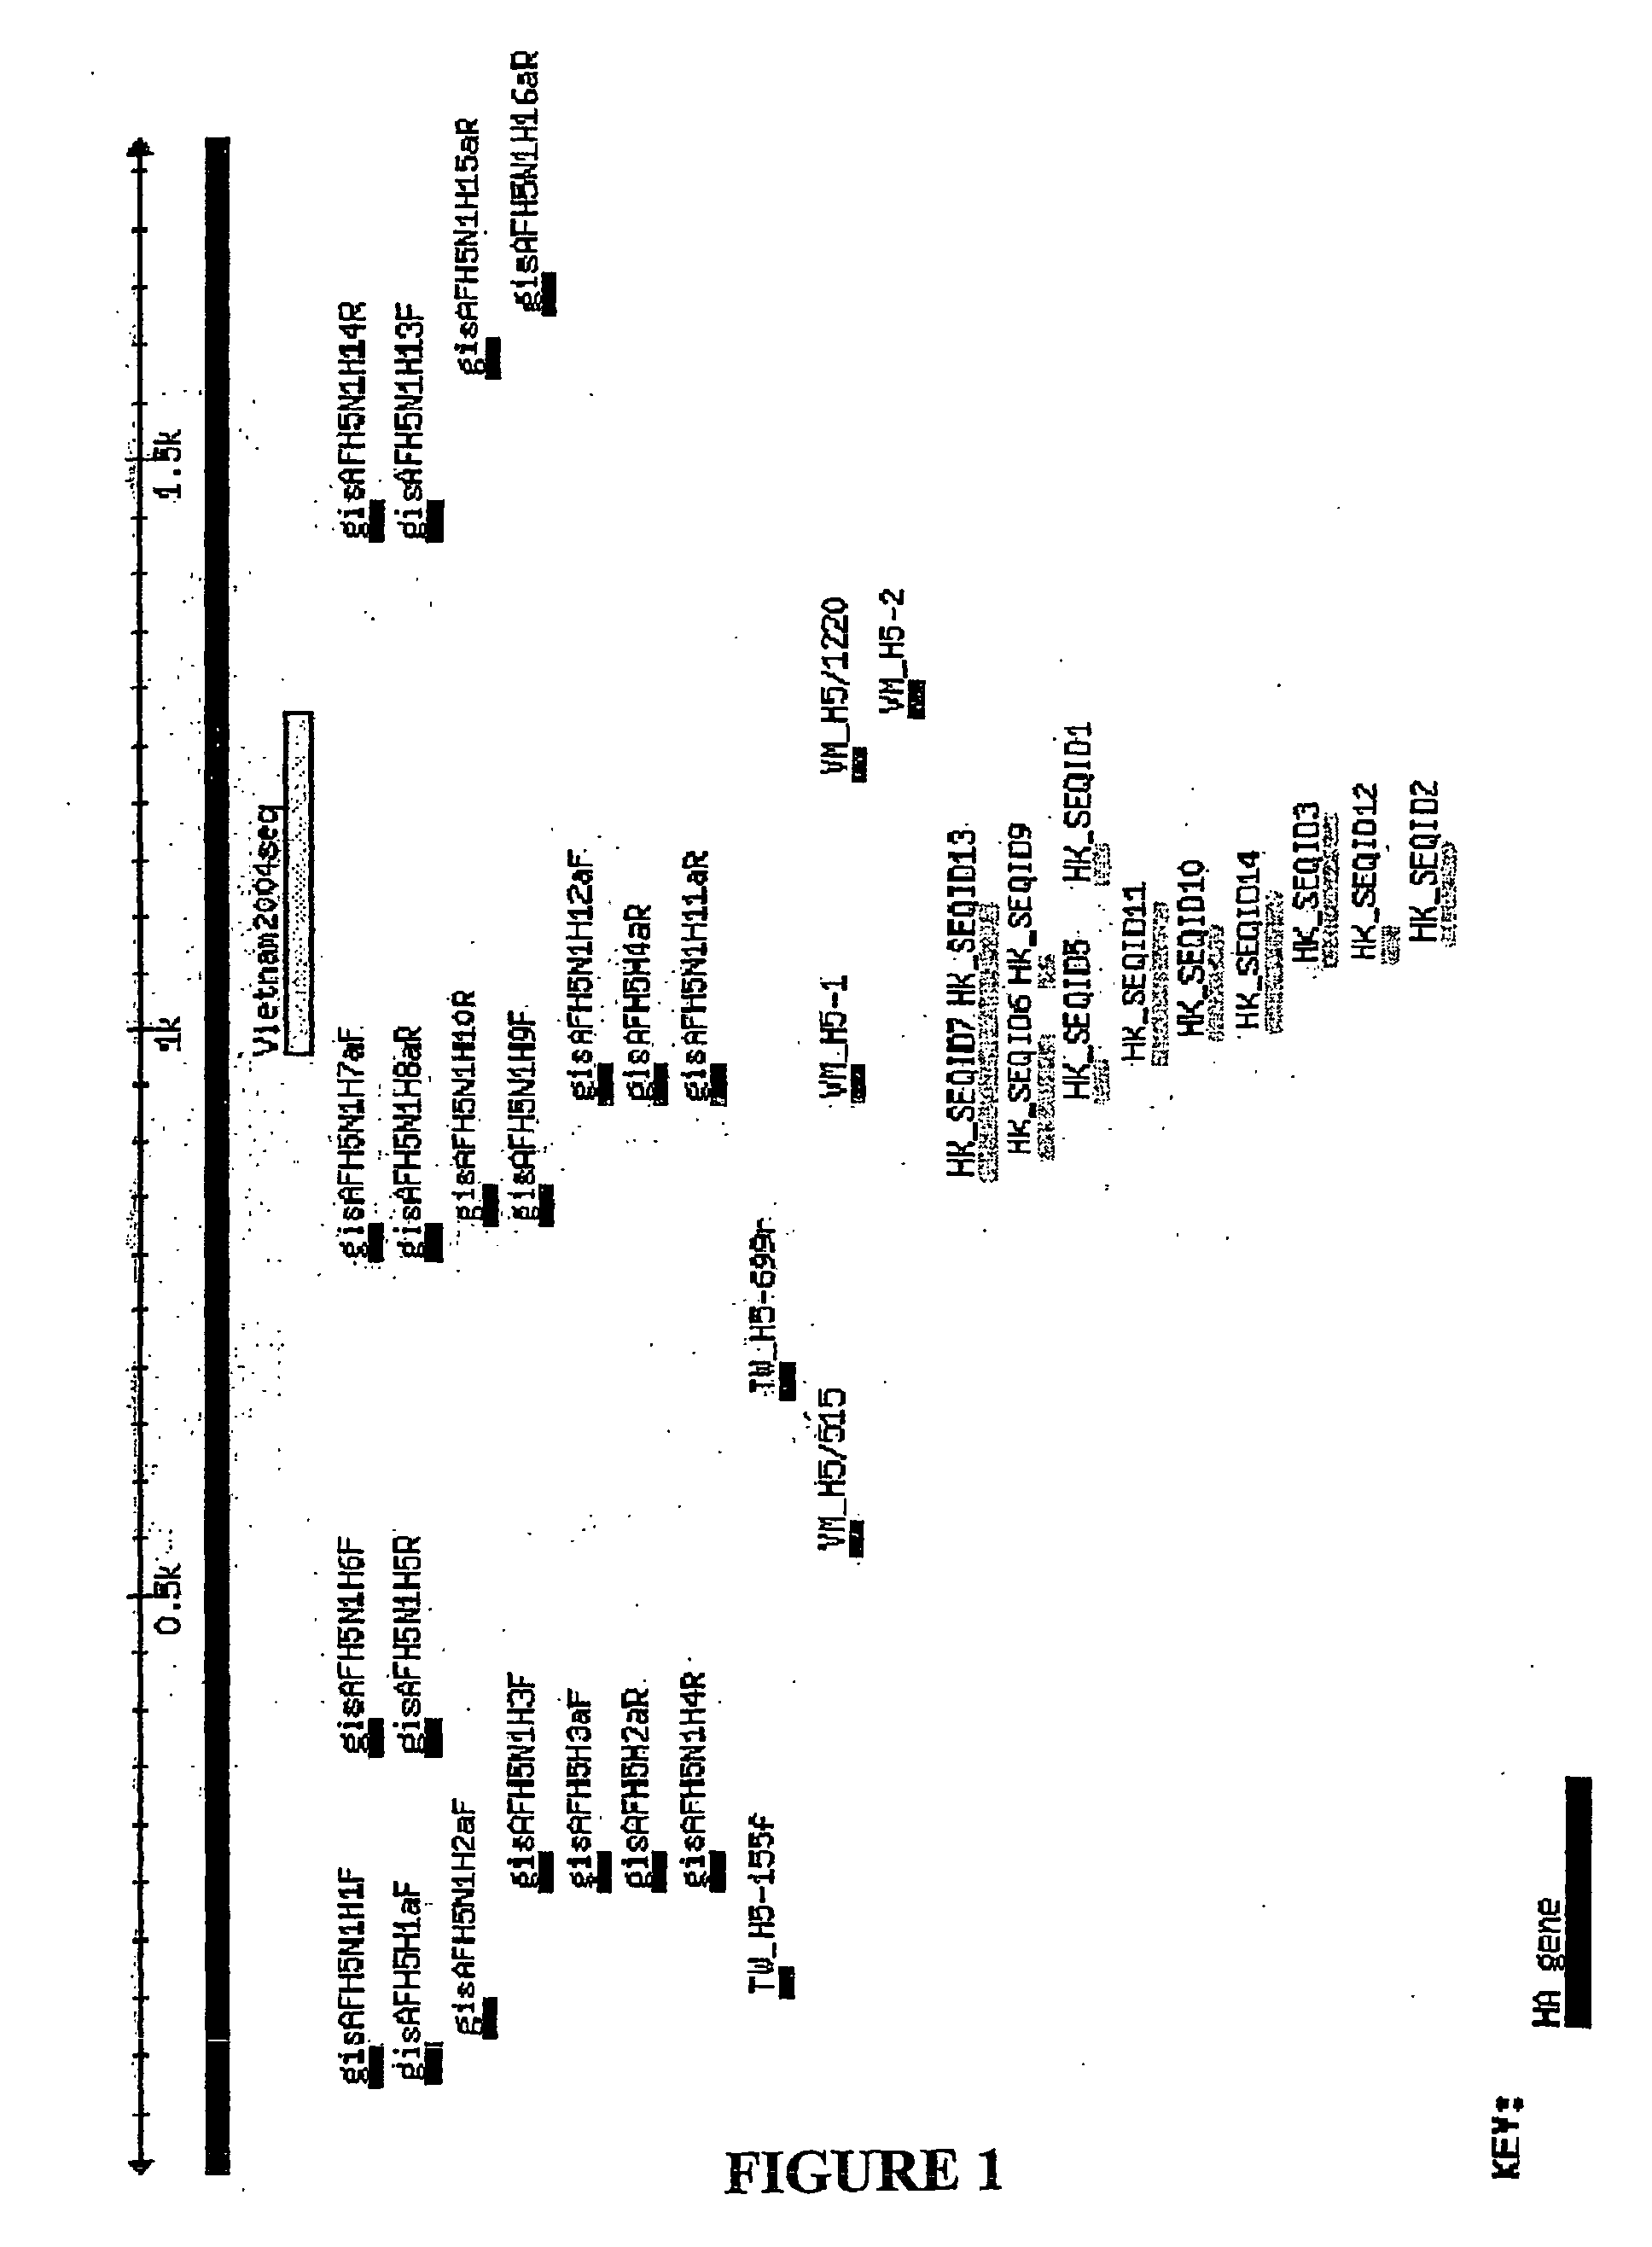 Diagnostic Primers and Method for Detecting Avian Influenza Virus Subtype H5 and H5n1